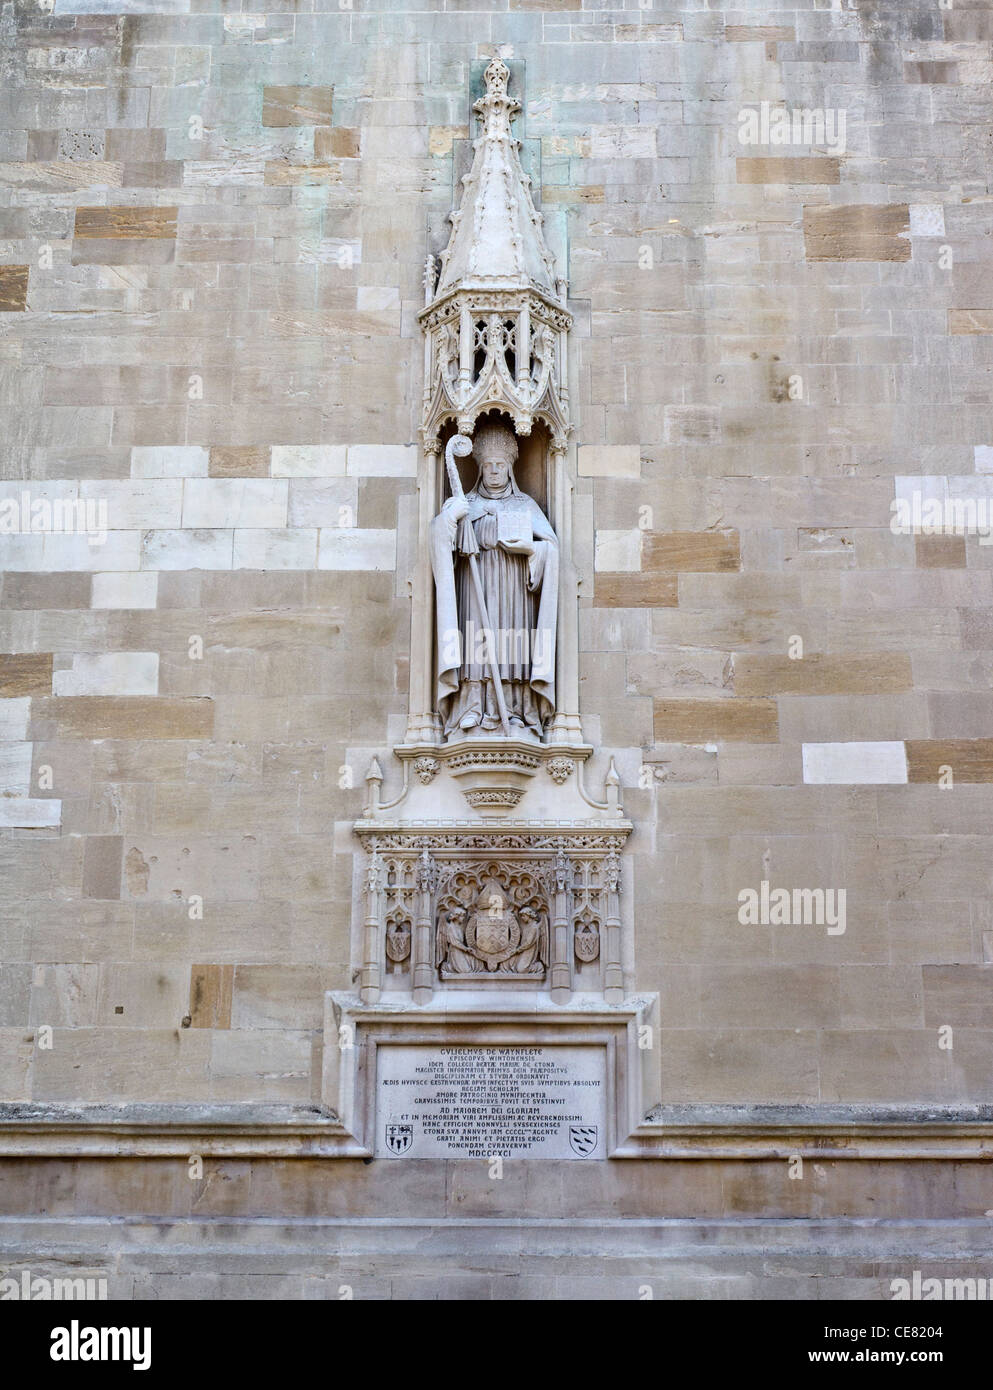 Statue to Willliam Patten of Waynflete, Bishop of Winchester, Lord Chancellor of England and first headmaster of Eton College. Stock Photo